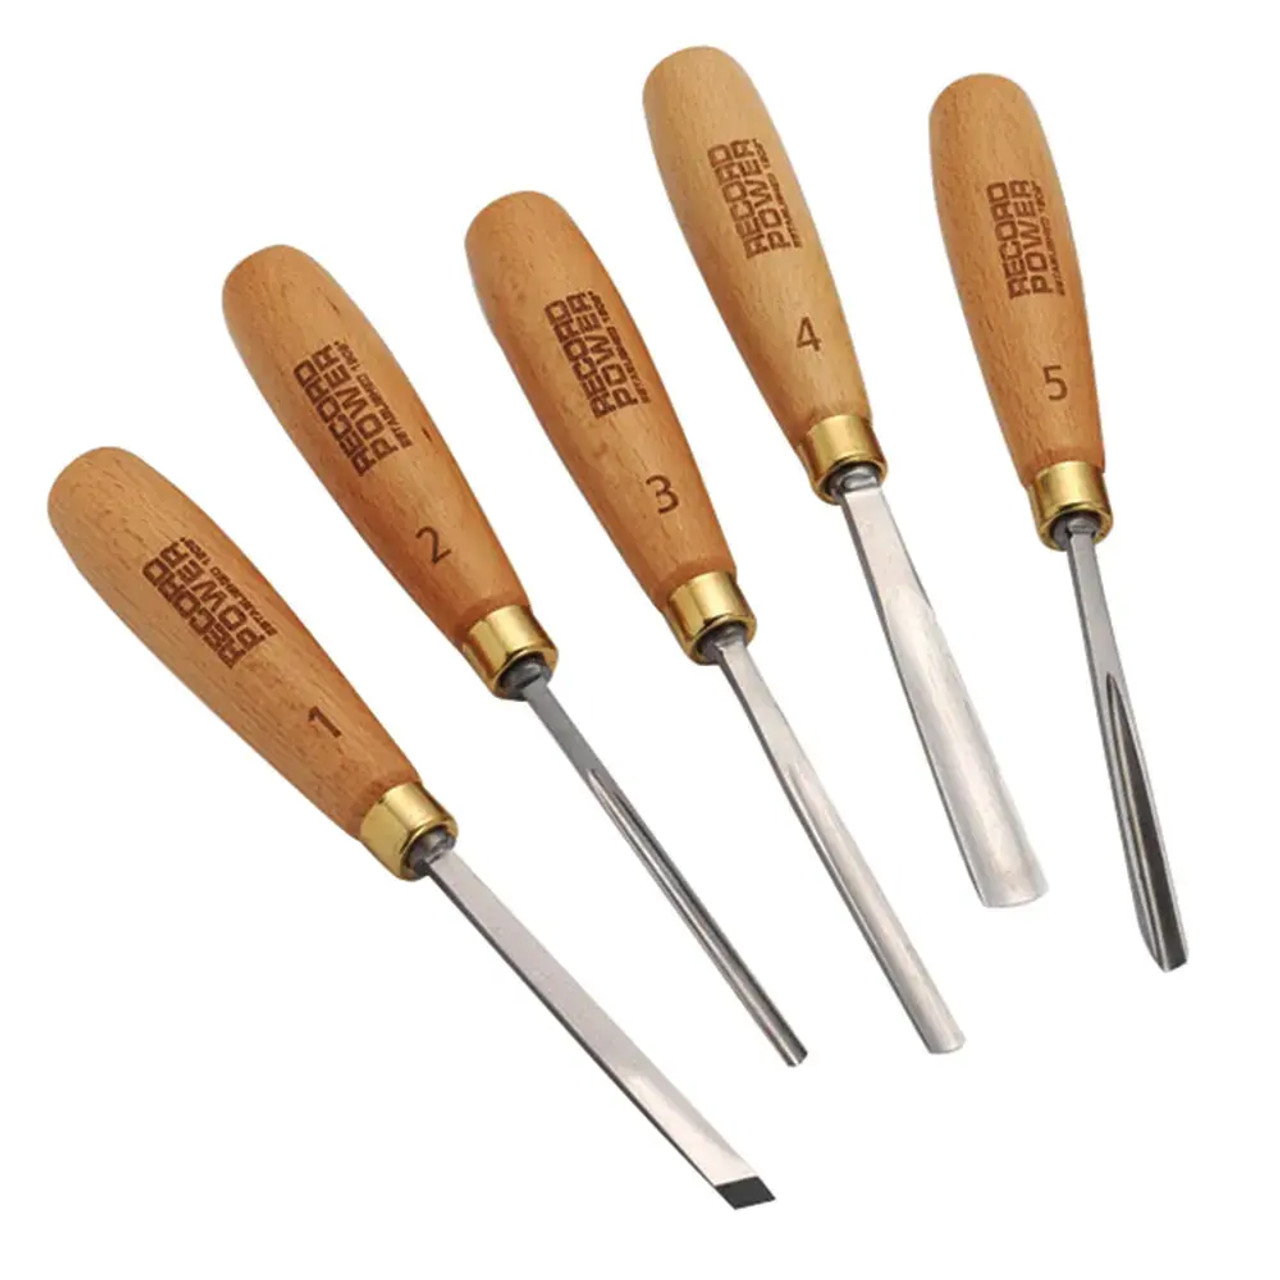 Carving By Numbers Essential Carving Tool Collection, 5-Piece